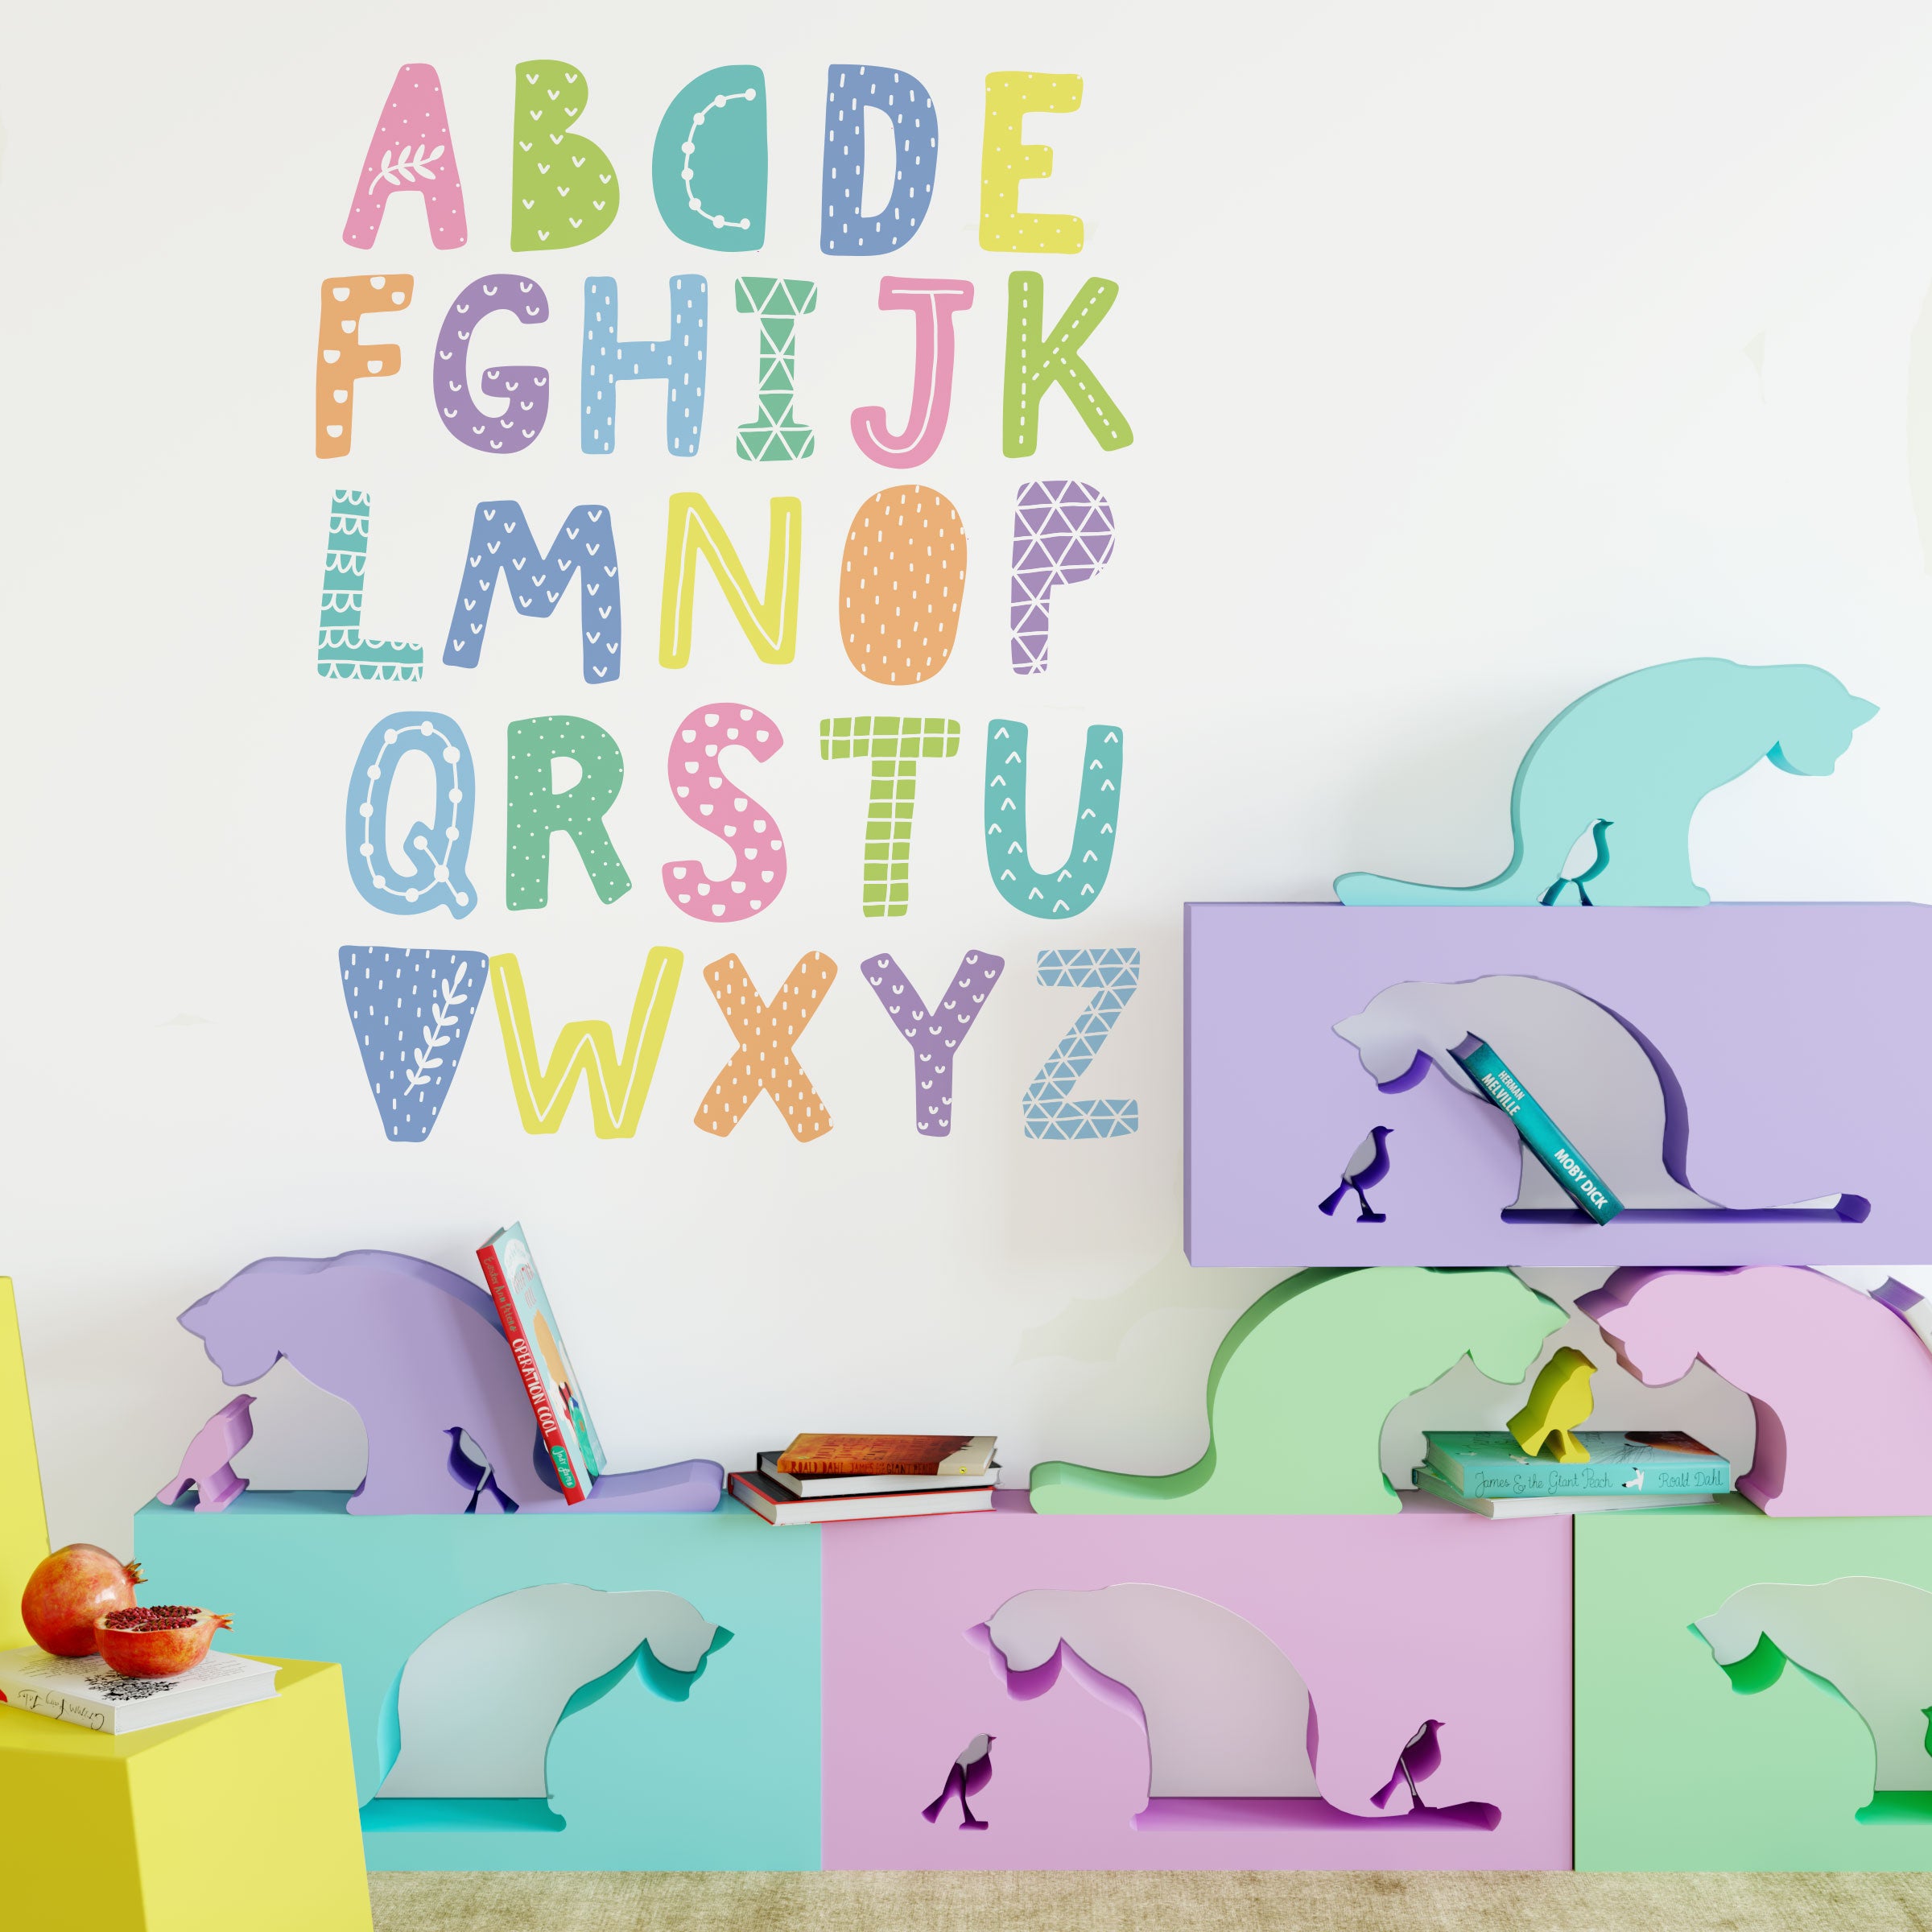 Animal Alphabet Decals Kids Wall Stickers Colorful ABC Letters Decals Peel  and Stick Removable Number Decals for Nursery Bedroom Kids Room Wall Closet